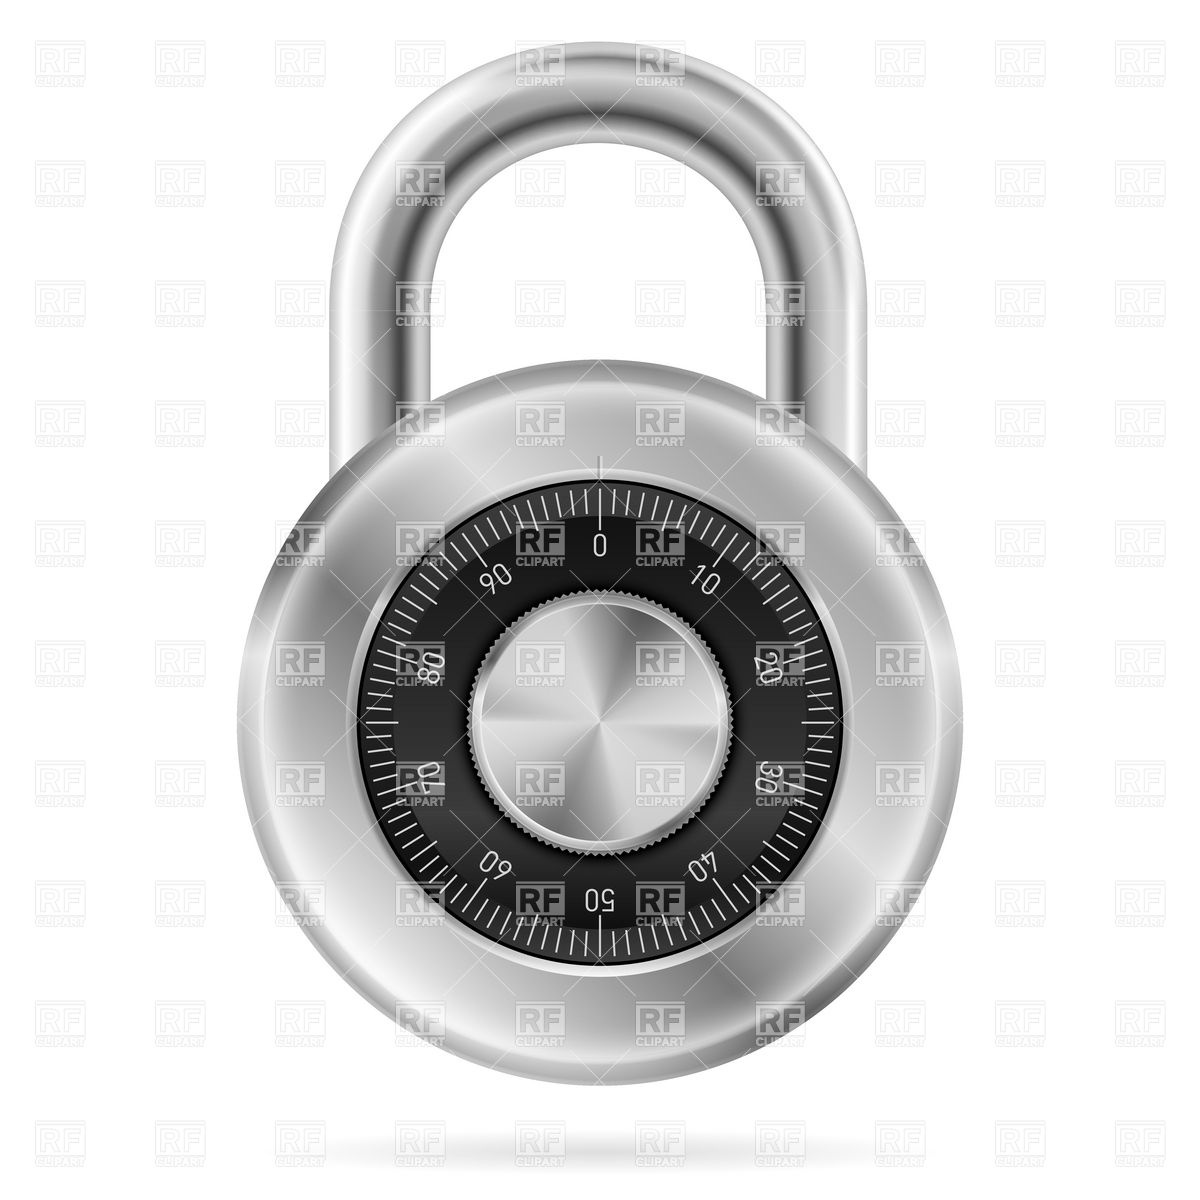 Lock Clipart Security Concept   Locked